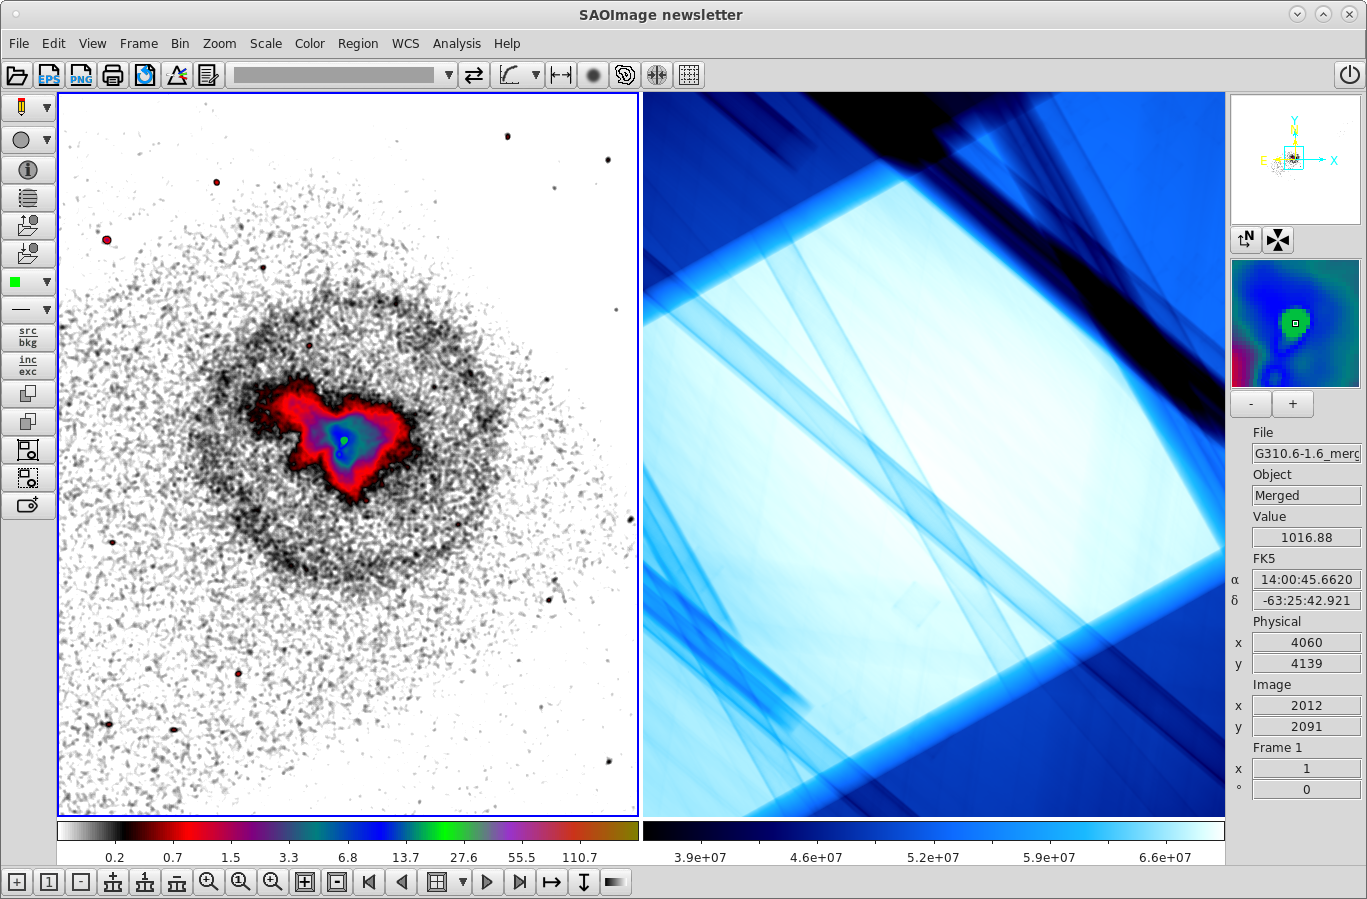 A screenshot of SAOImageDS9, showing two large images surrounded by gray borders with menus and icons. The left image shows an astronomical image with a colorbar underneath it; there is a ring of black dense black points surrounding a blob that transitions in color from red on the outside through green and into blue and cyan. The right image is an exposure map image, showing overlapping patterns of squares and thin rectangular strips at angles. The center of the image is a bright light blue, transitioning to a darker blue at the borders of the main square and black in a few other locations.